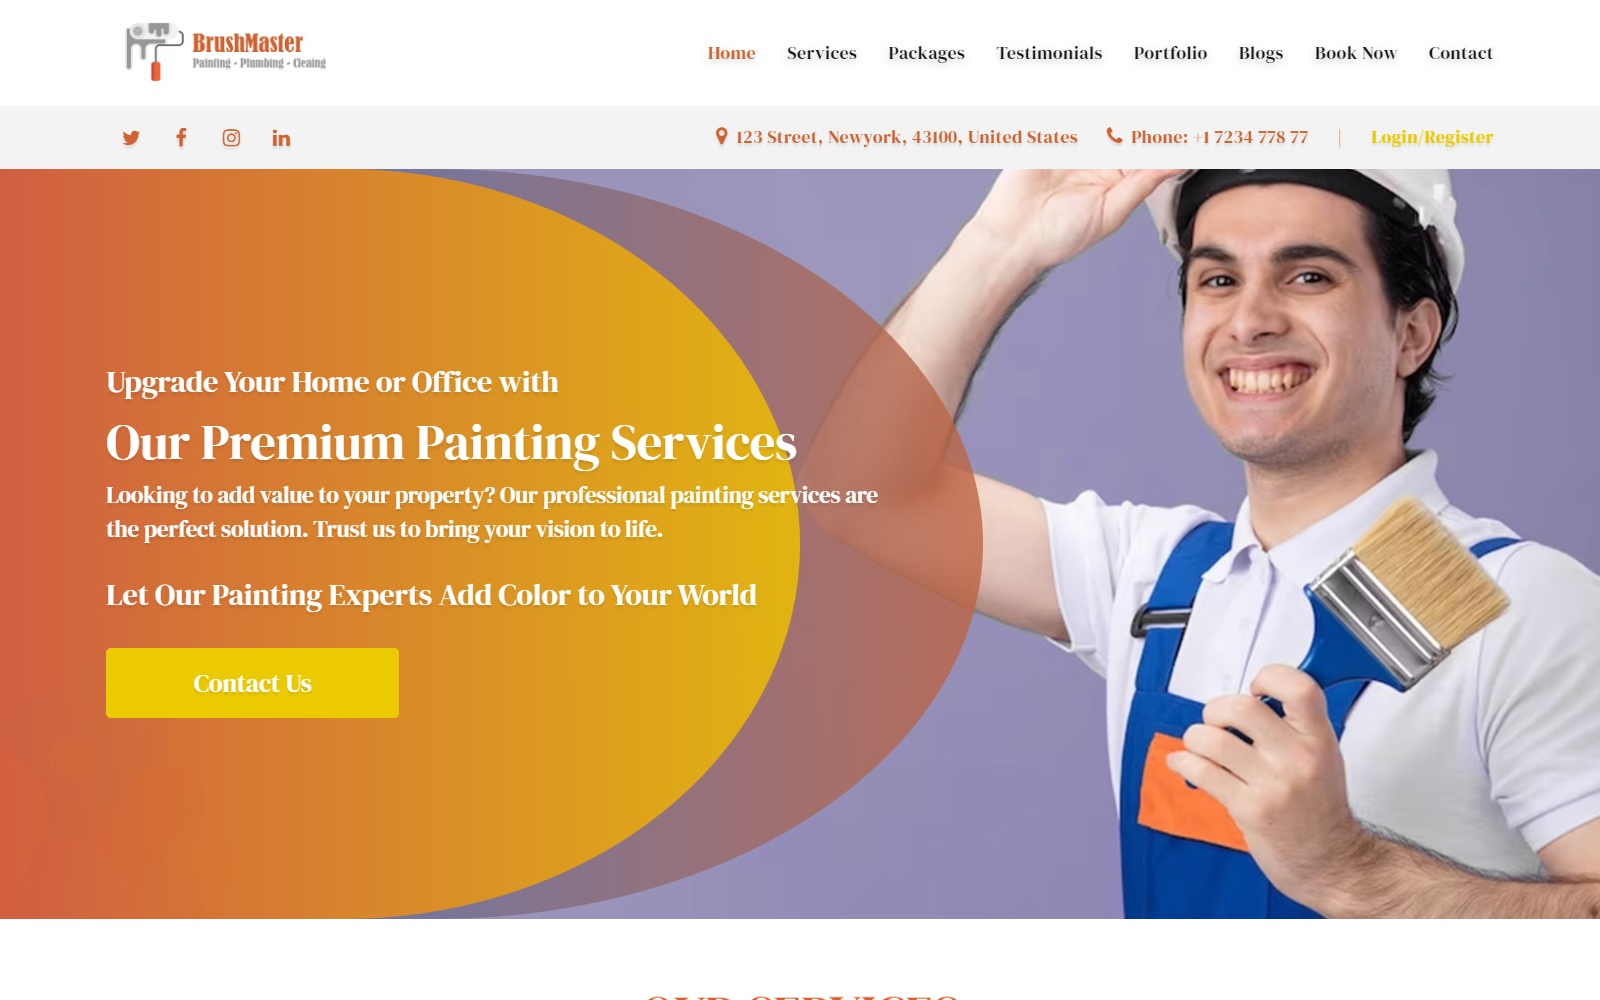 BrushMaster - Painting Company & Services Landing Page Template